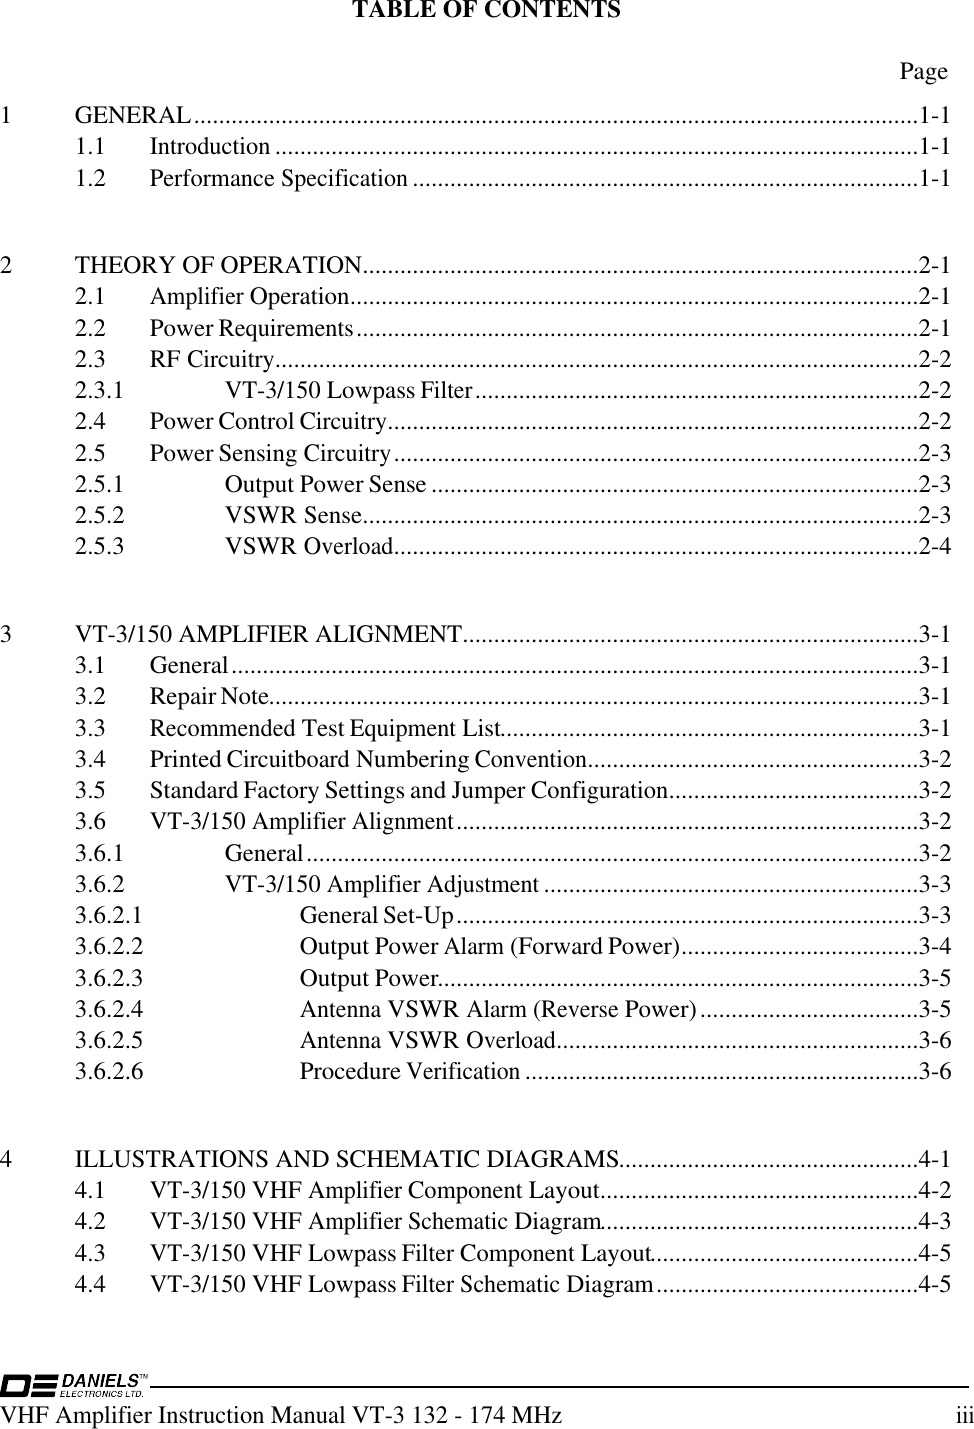 VHF Amplifier Instruction Manual VT-3 132 - 174 MHziiiTABLE OF CONTENTSPage1 GENERAL....................................................................................................................1-11.1Introduction.......................................................................................................1-11.2Performance Specification.................................................................................1-12 THEORY OF OPERATION.........................................................................................2-12.1Amplifier Operation...........................................................................................2-12.2 Power Requirements..........................................................................................2-12.3 RF Circuitry.......................................................................................................2-22.3.1VT-3/150 Lowpass Filter.......................................................................2-22.4 Power Control Circuitry.....................................................................................2-22.5 Power Sensing Circuitry....................................................................................2-32.5.1 Output Power Sense ..............................................................................2-32.5.2 VSWR Sense.........................................................................................2-32.5.3 VSWR Overload....................................................................................2-43VT-3/150 AMPLIFIER ALIGNMENT.........................................................................3-13.1 General..............................................................................................................3-13.2 Repair Note........................................................................................................3-13.3Recommended Test Equipment List...................................................................3-13.4 Printed Circuitboard Numbering Convention.....................................................3-23.5 Standard Factory Settings and Jumper Configuration........................................3-23.6VT-3/150 Amplifier Alignment..........................................................................3-23.6.1 General..................................................................................................3-23.6.2VT-3/150 Amplifier Adjustment............................................................3-33.6.2.1 General Set-Up..........................................................................3-33.6.2.2 Output Power Alarm (Forward Power)......................................3-43.6.2.3 Output Power.............................................................................3-53.6.2.4Antenna VSWR Alarm (Reverse Power)...................................3-53.6.2.5Antenna VSWR Overload..........................................................3-63.6.2.6 Procedure Verification...............................................................3-64 ILLUSTRATIONS AND SCHEMATIC DIAGRAMS................................................4-14.1VT-3/150 VHF Amplifier Component Layout...................................................4-24.2VT-3/150 VHF Amplifier Schematic Diagram...................................................4-34.3VT-3/150 VHF Lowpass Filter Component Layout...........................................4-54.4VT-3/150 VHF Lowpass Filter Schematic Diagram..........................................4-5